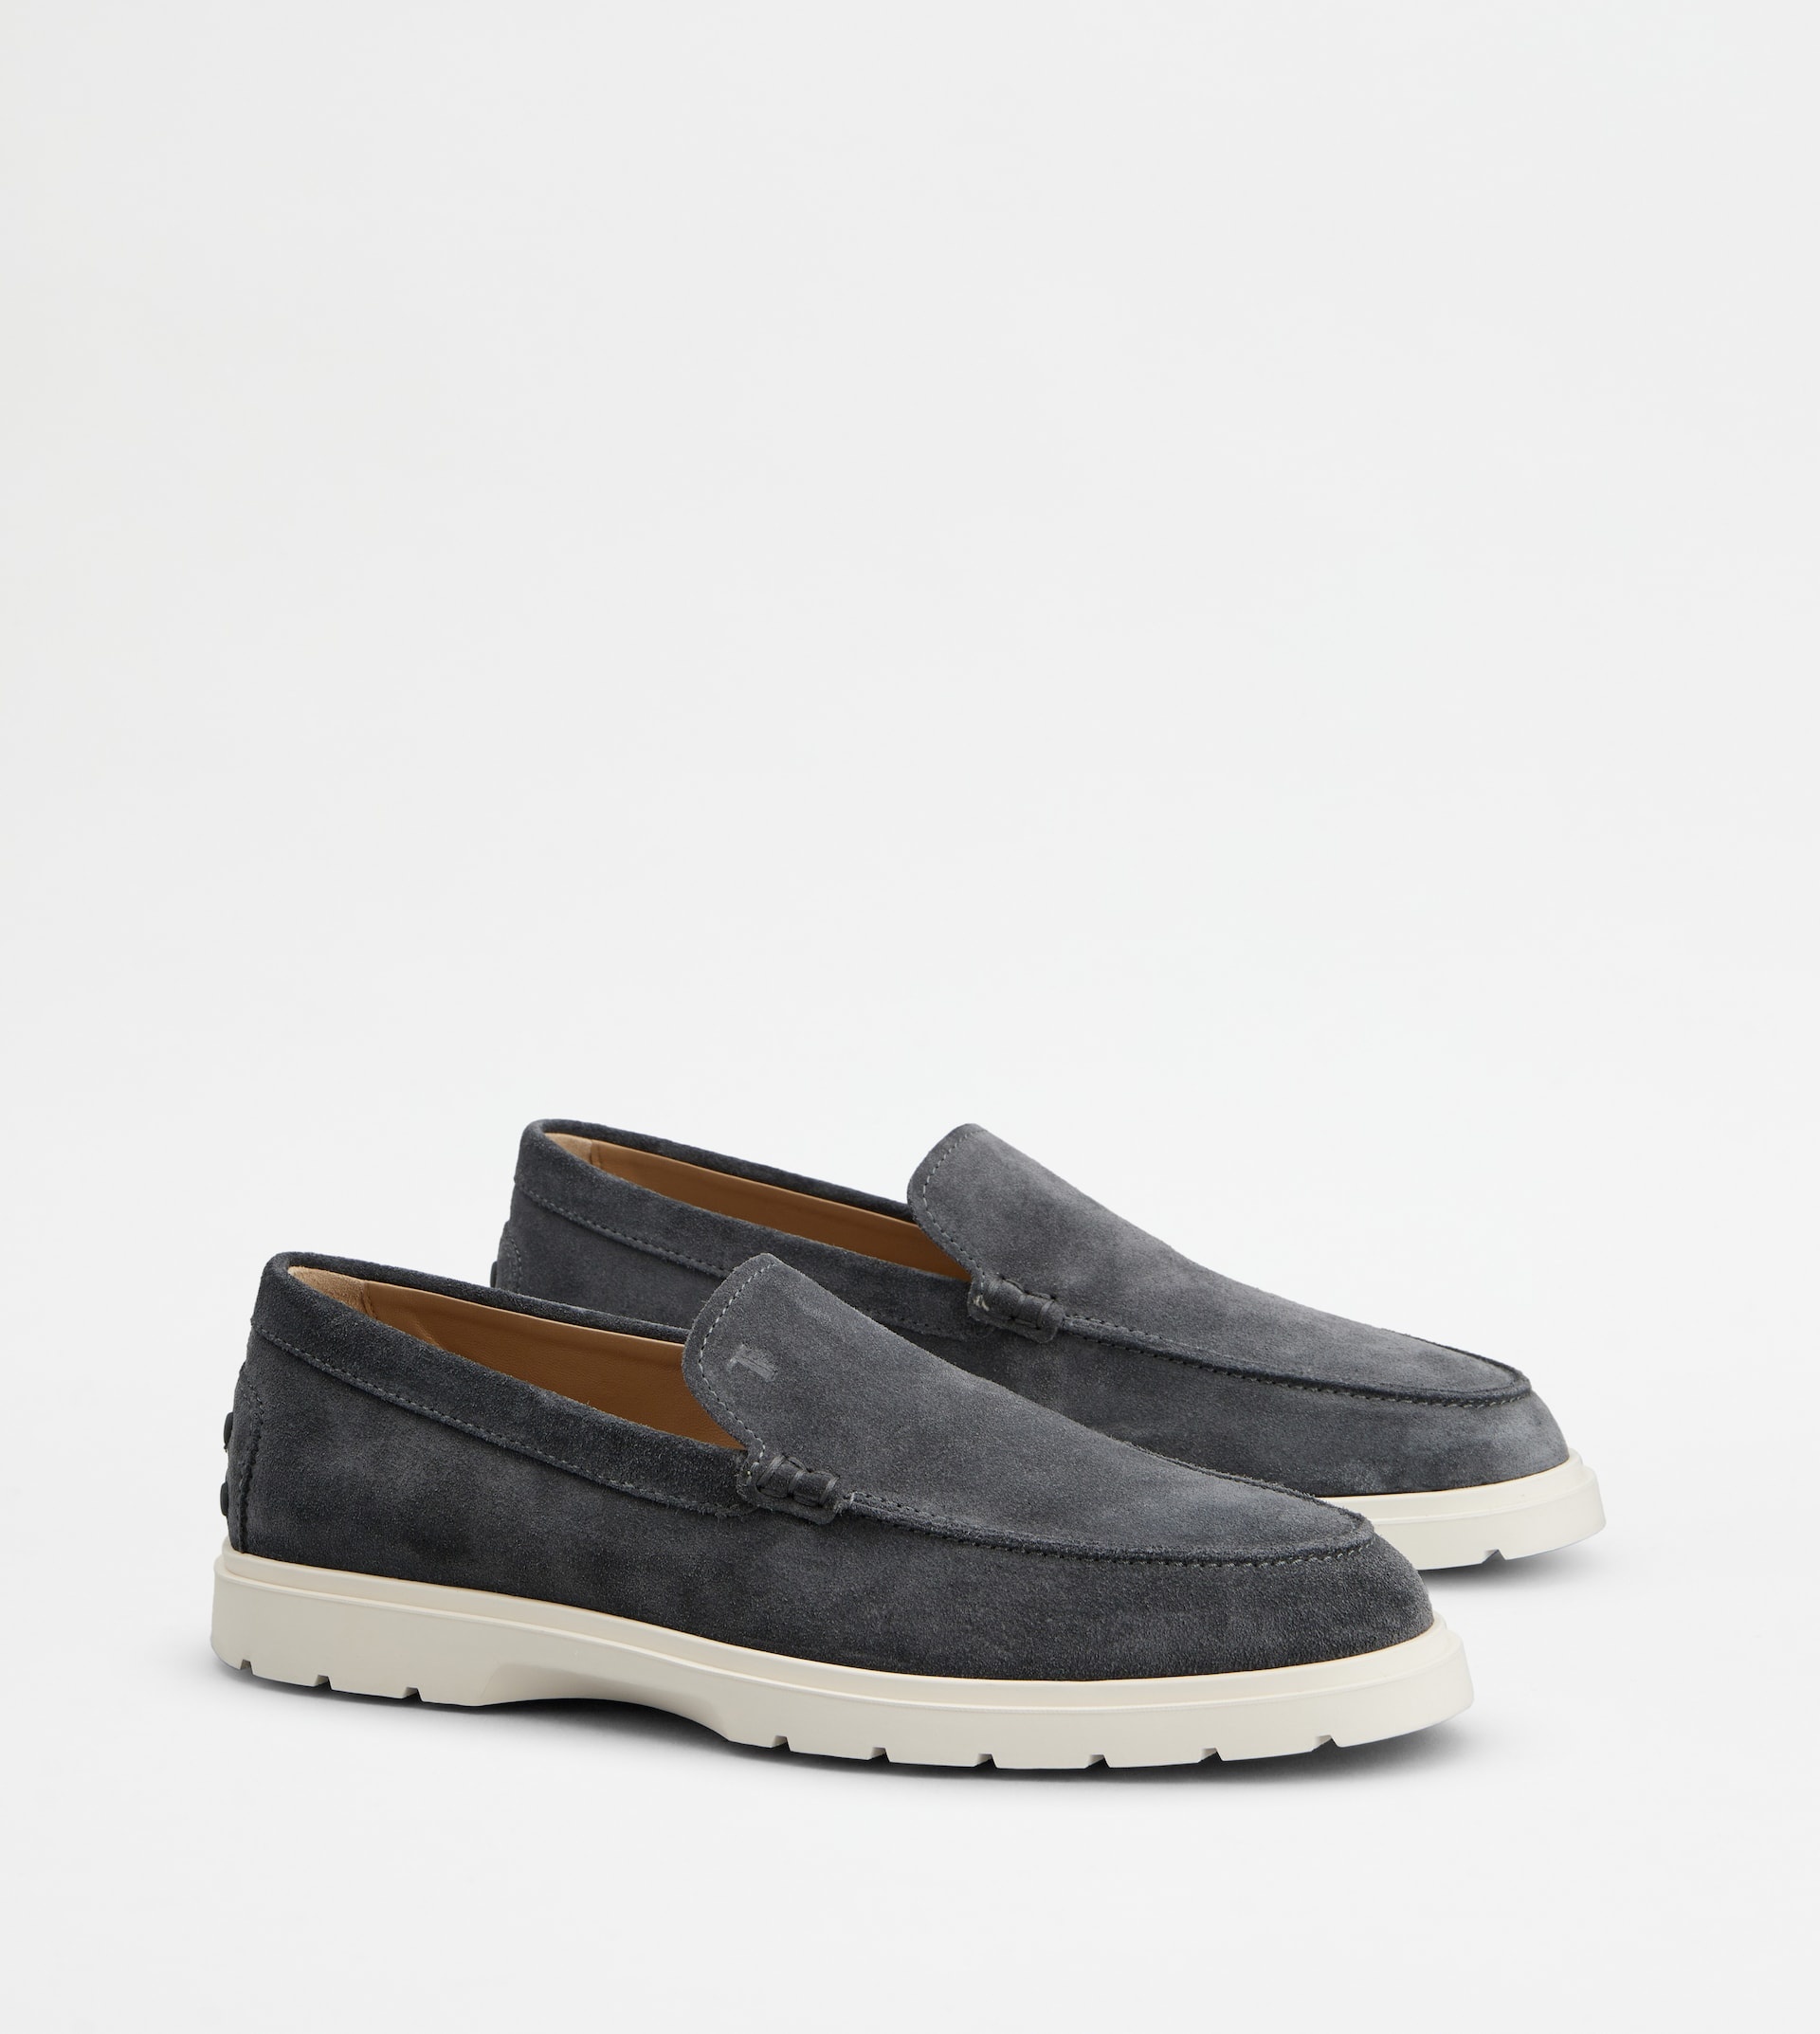 SLIPPER LOAFERS IN SUEDE - GREY - 3